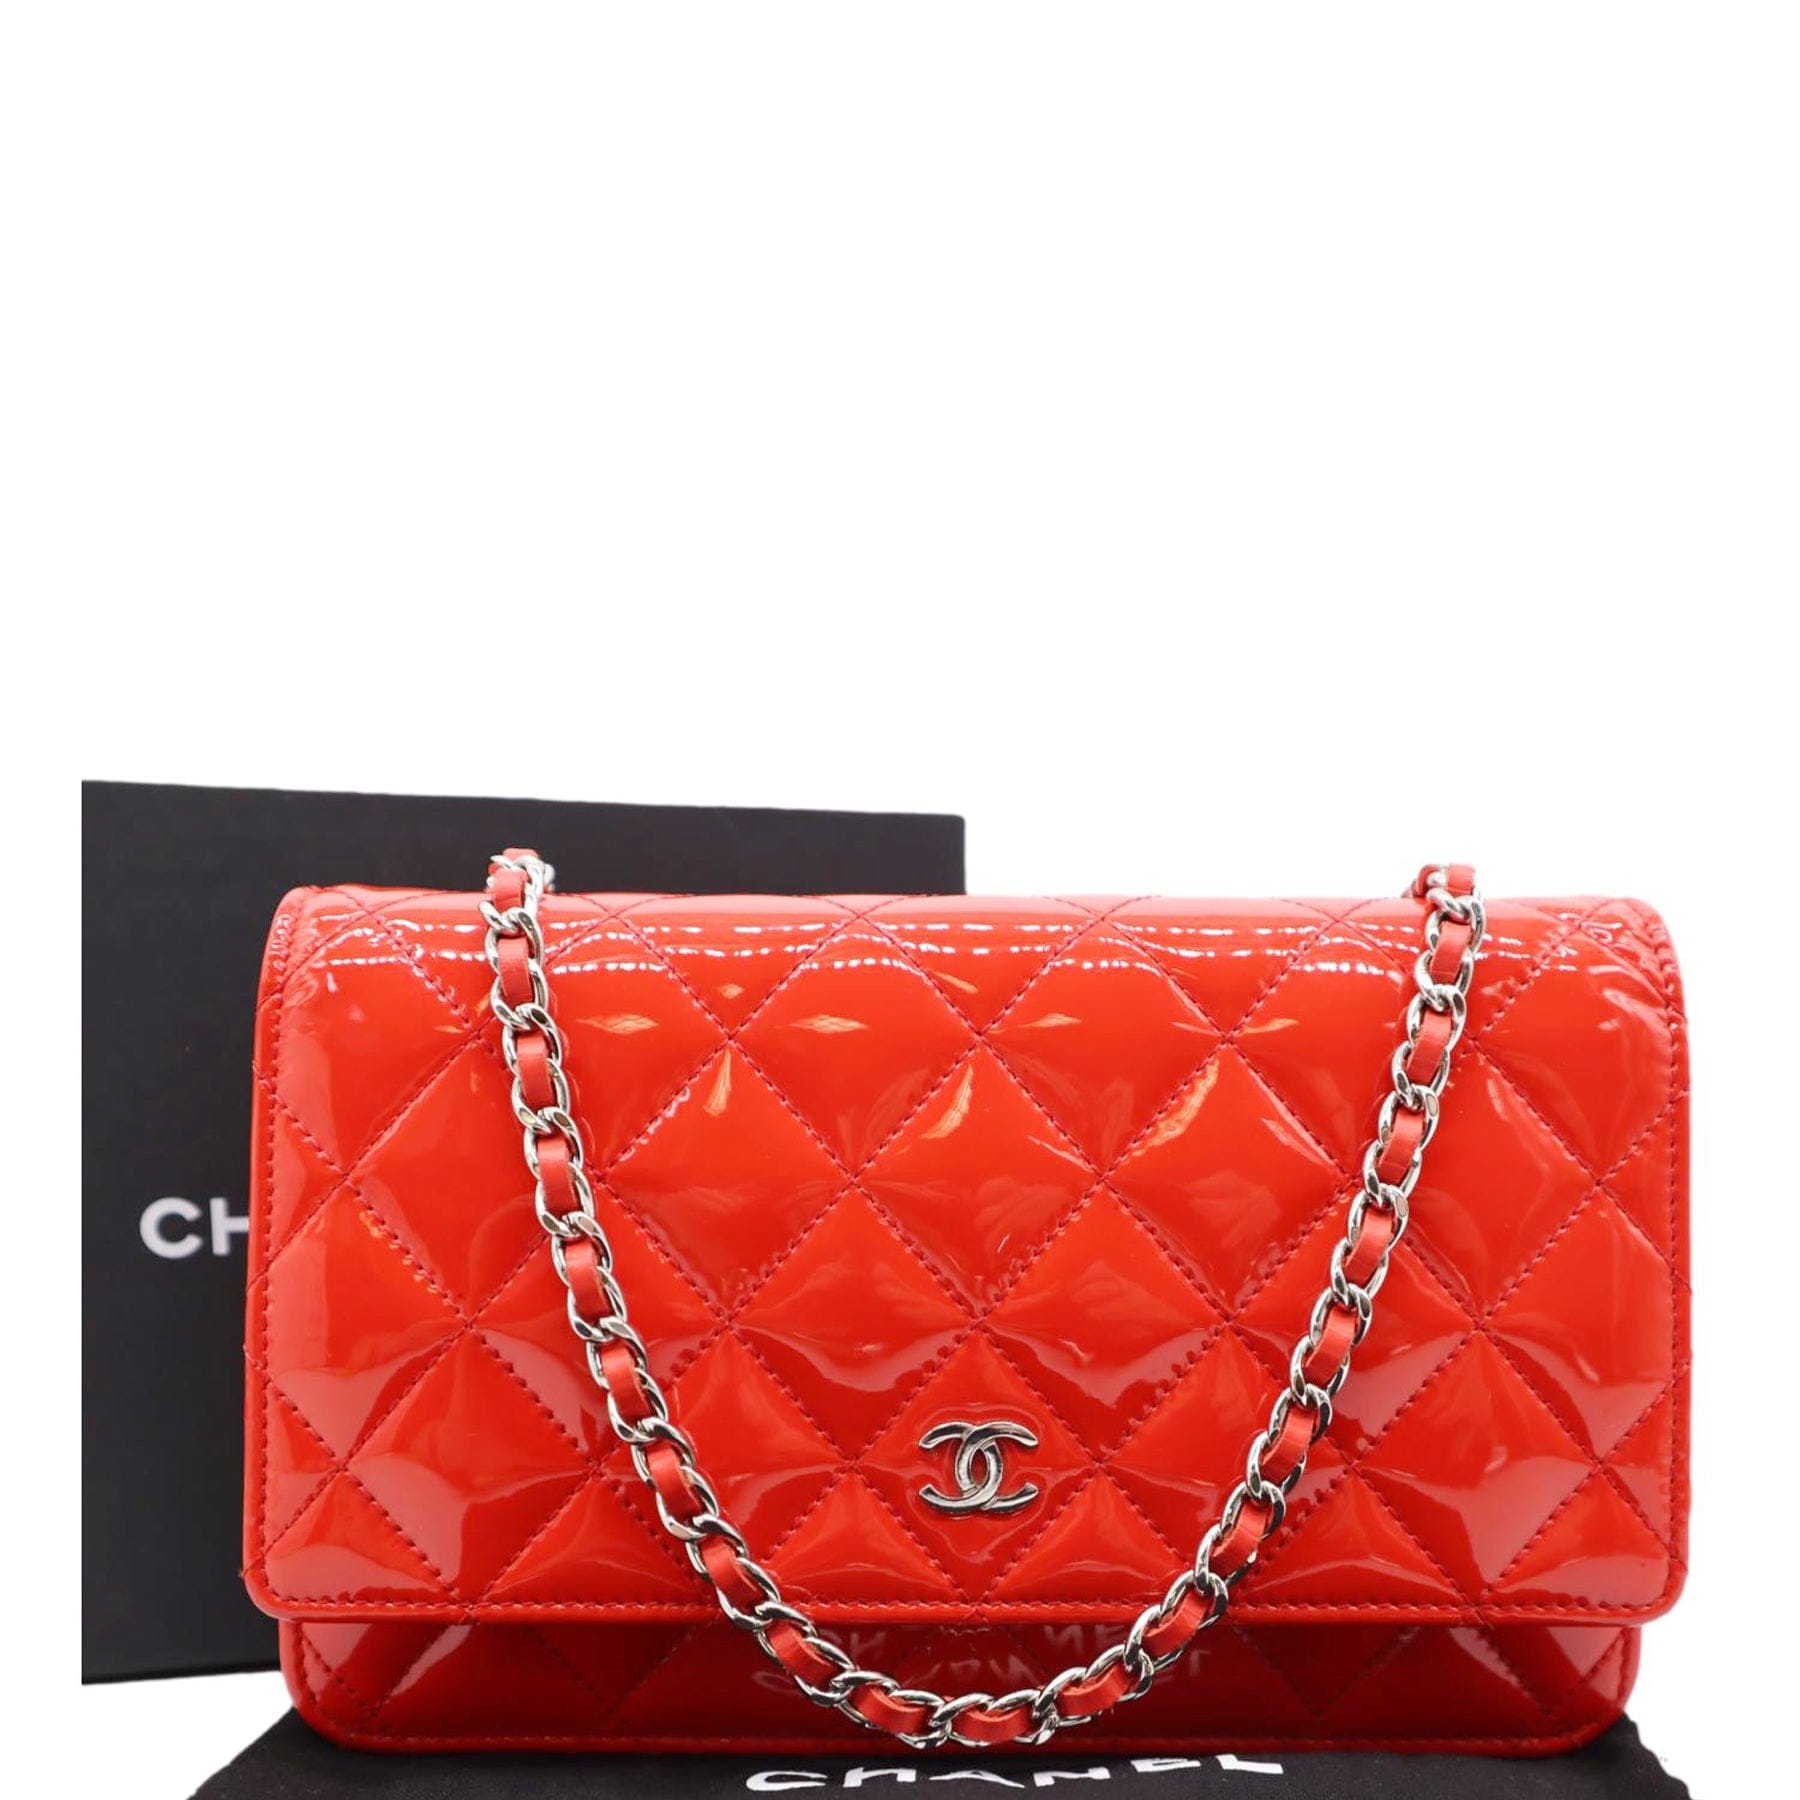 CHANEL Patent Wallet On Clutch Bag Red